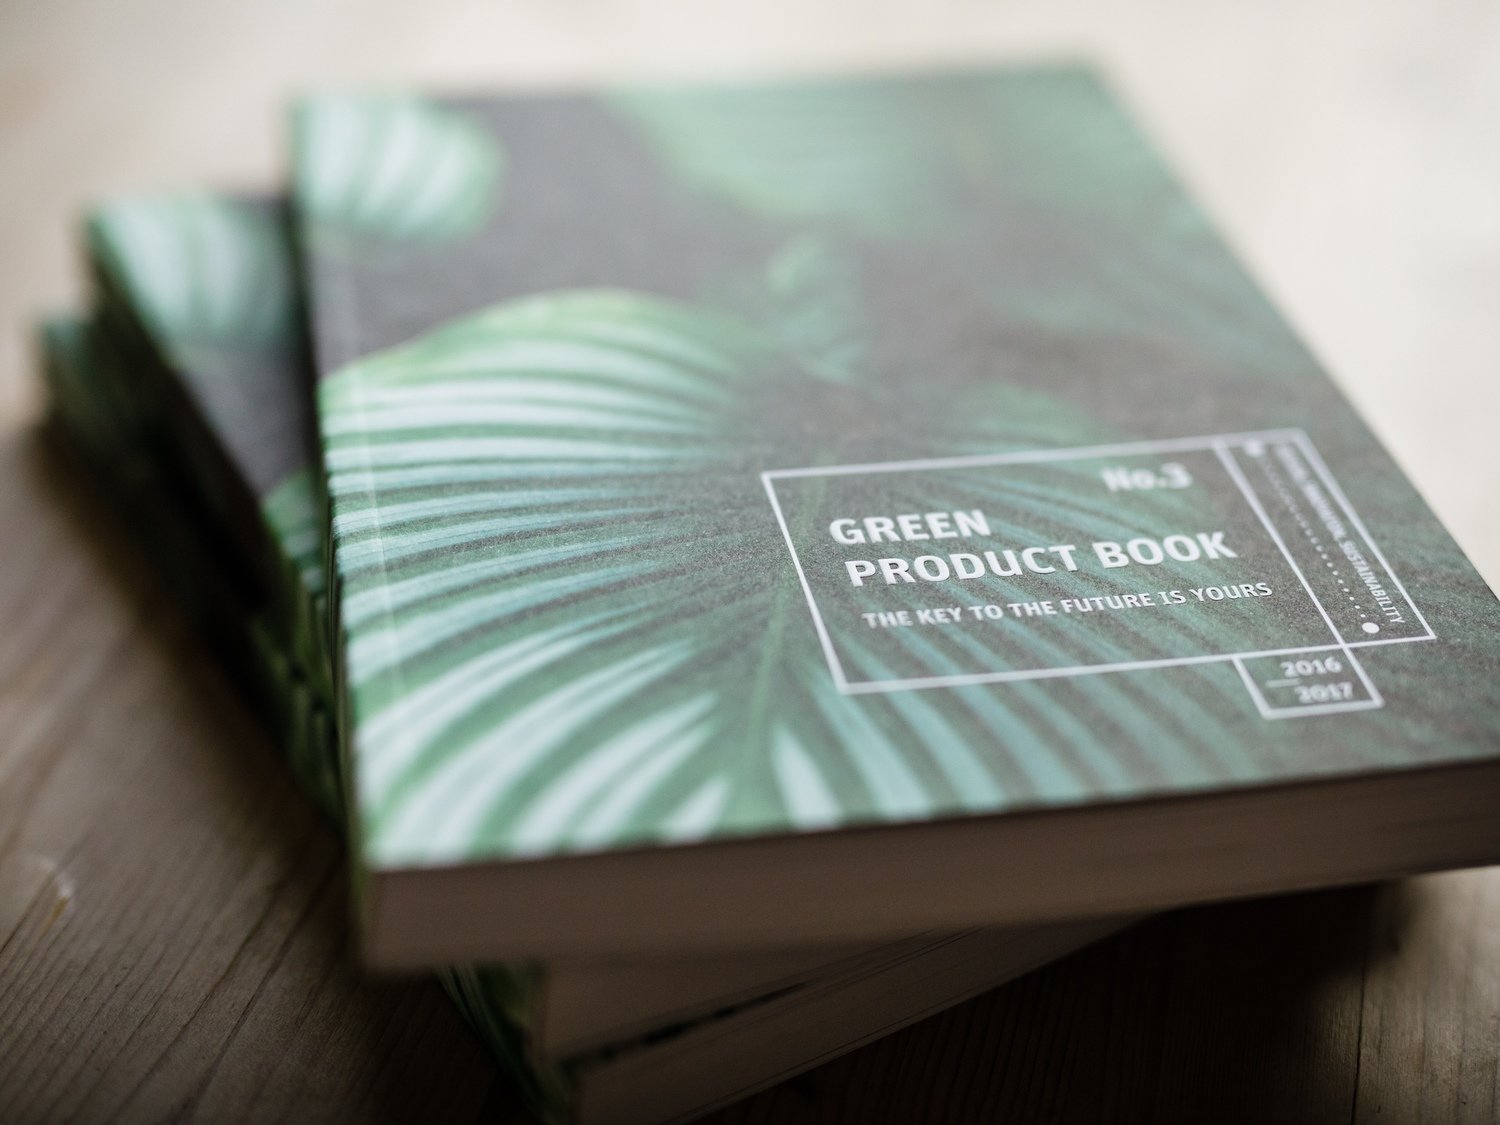 Green Product Book No 3 & 4